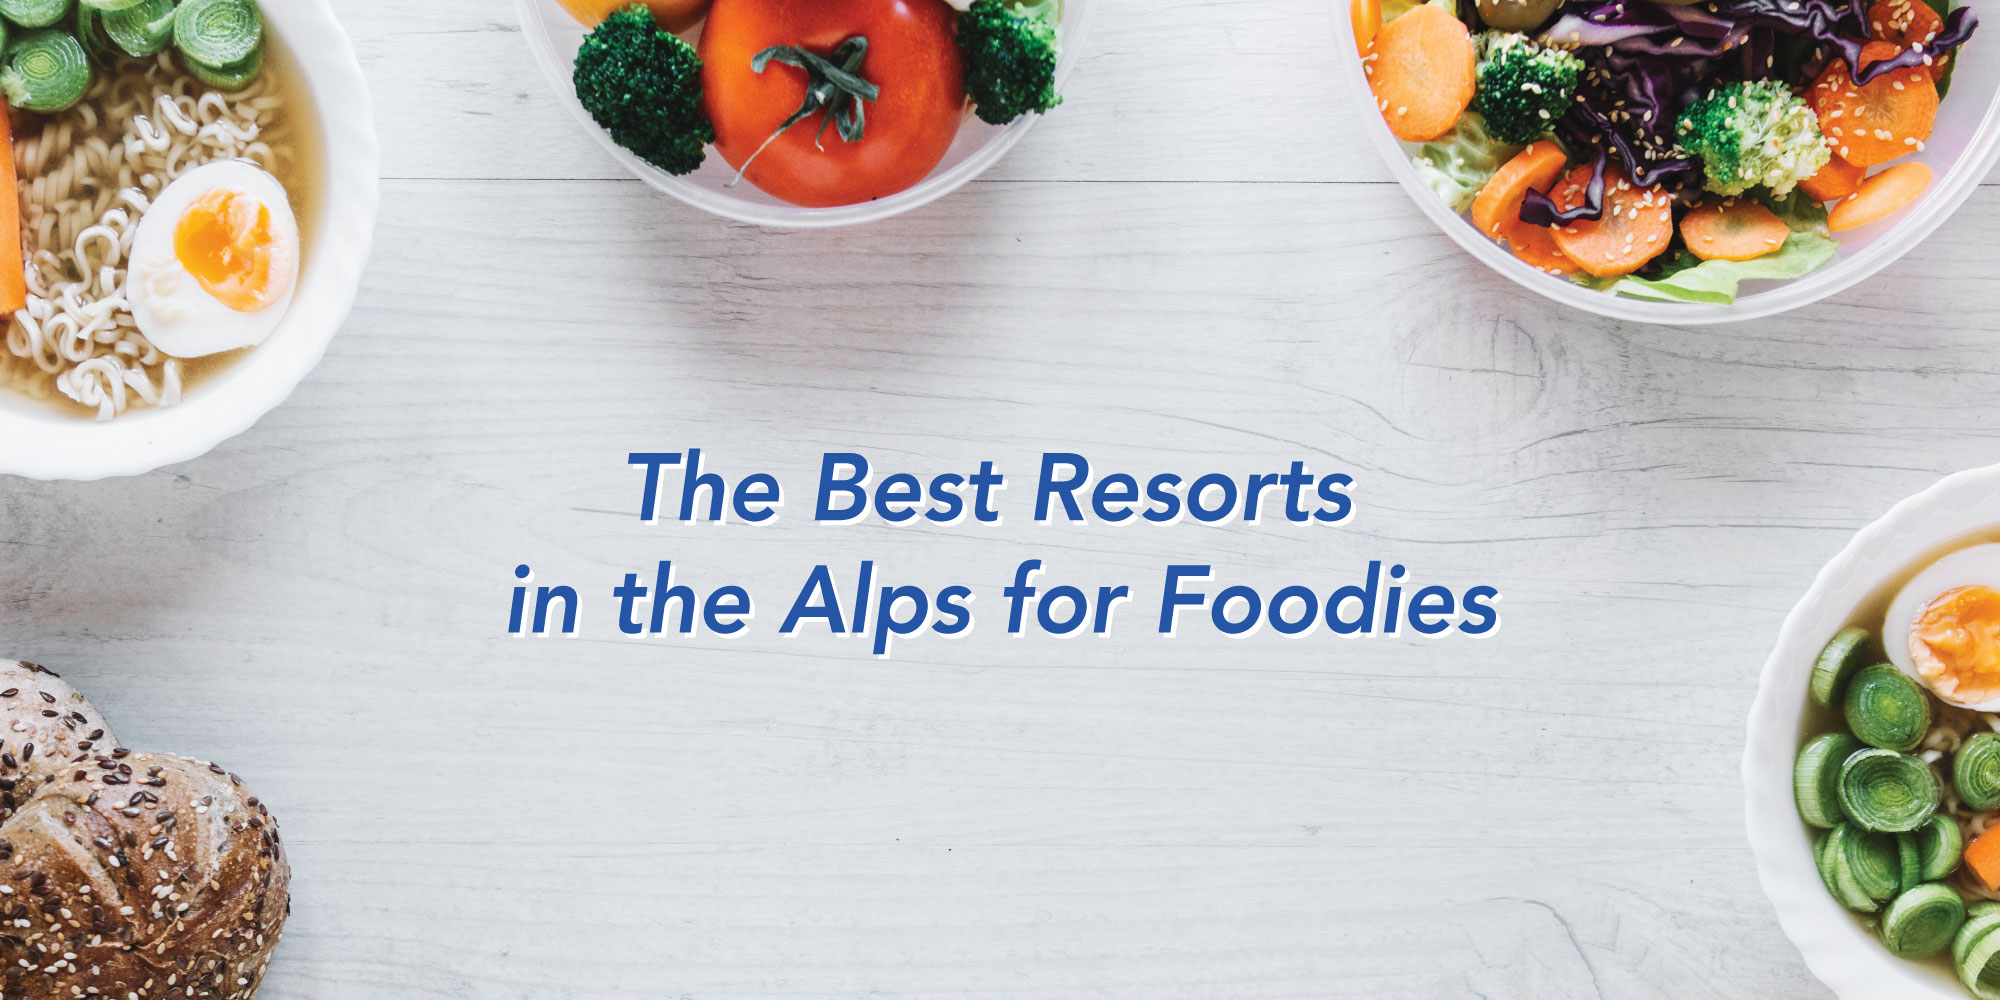 Bowls of food on white table with caption saying "The Best Resorts in the Alps for Foodies"